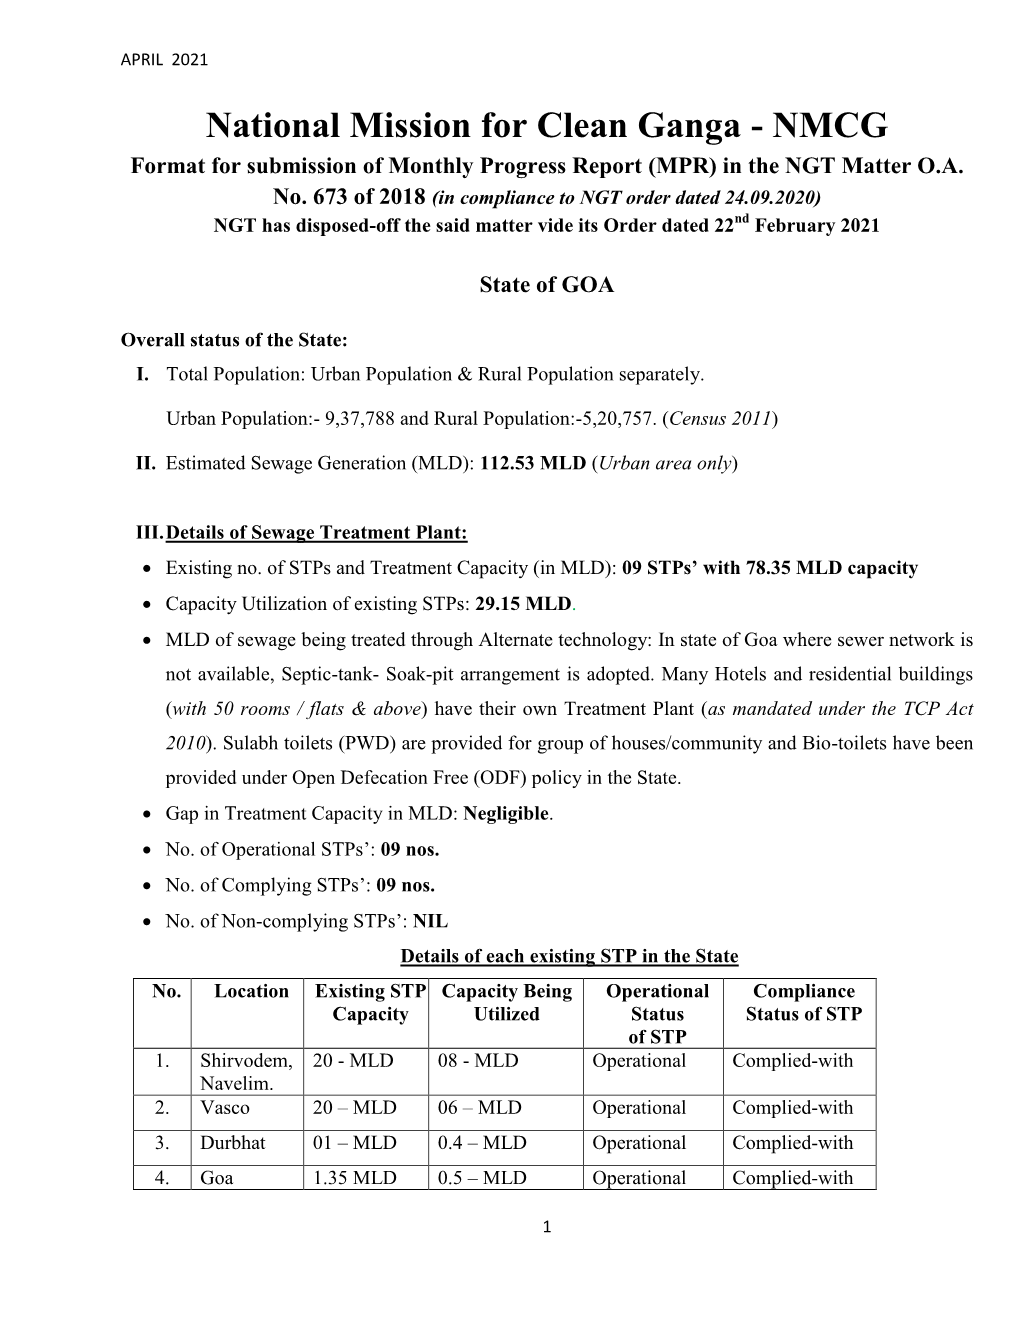 National Mission for Clean Ganga - NMCG Format for Submission of Monthly Progress Report (MPR) in the NGT Matter O.A